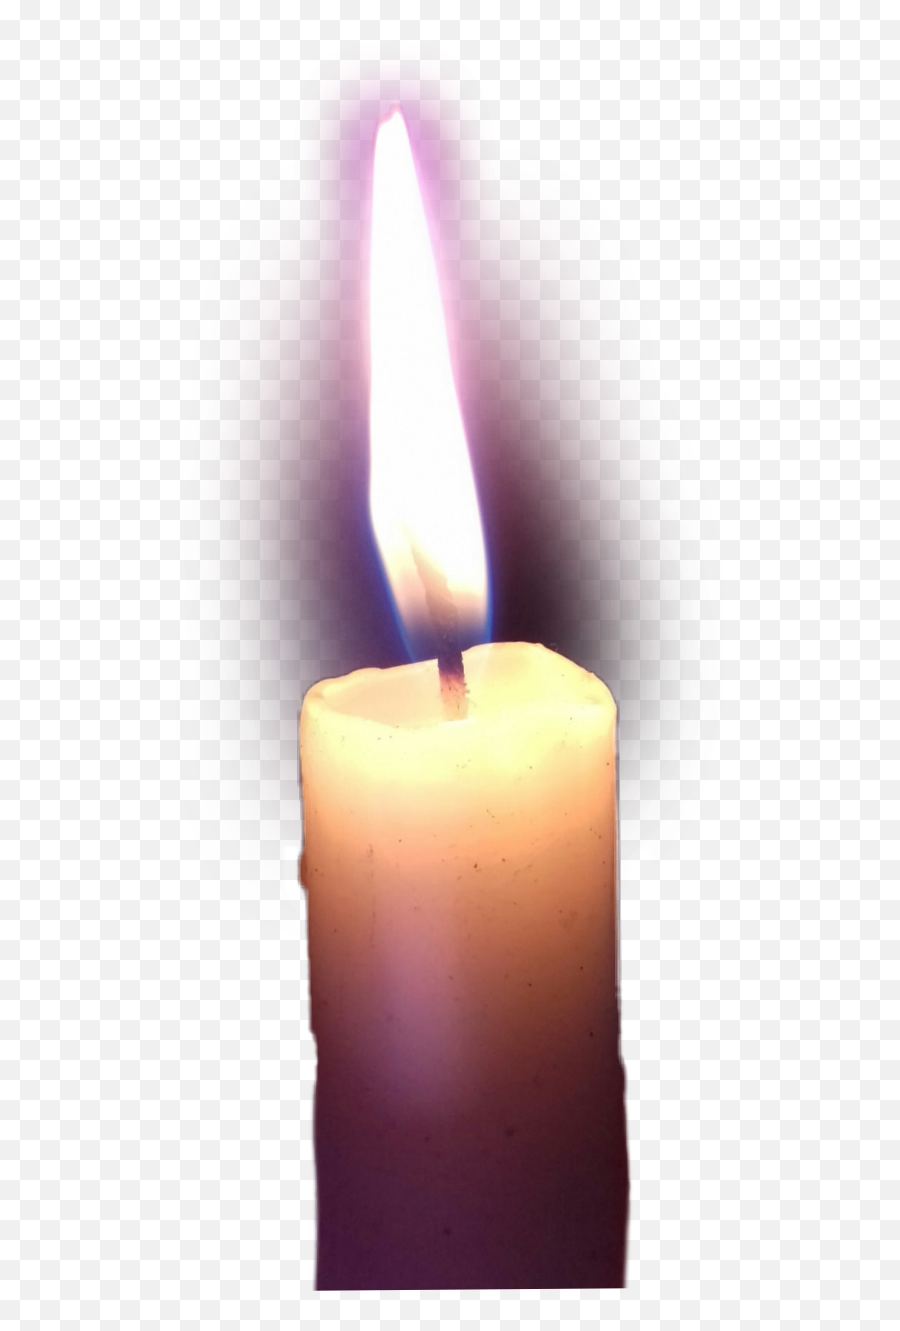 Candle Flame Lit Dark Light Made From The Artist Of - Lit Candle Transparent Png,Candle Flame Png